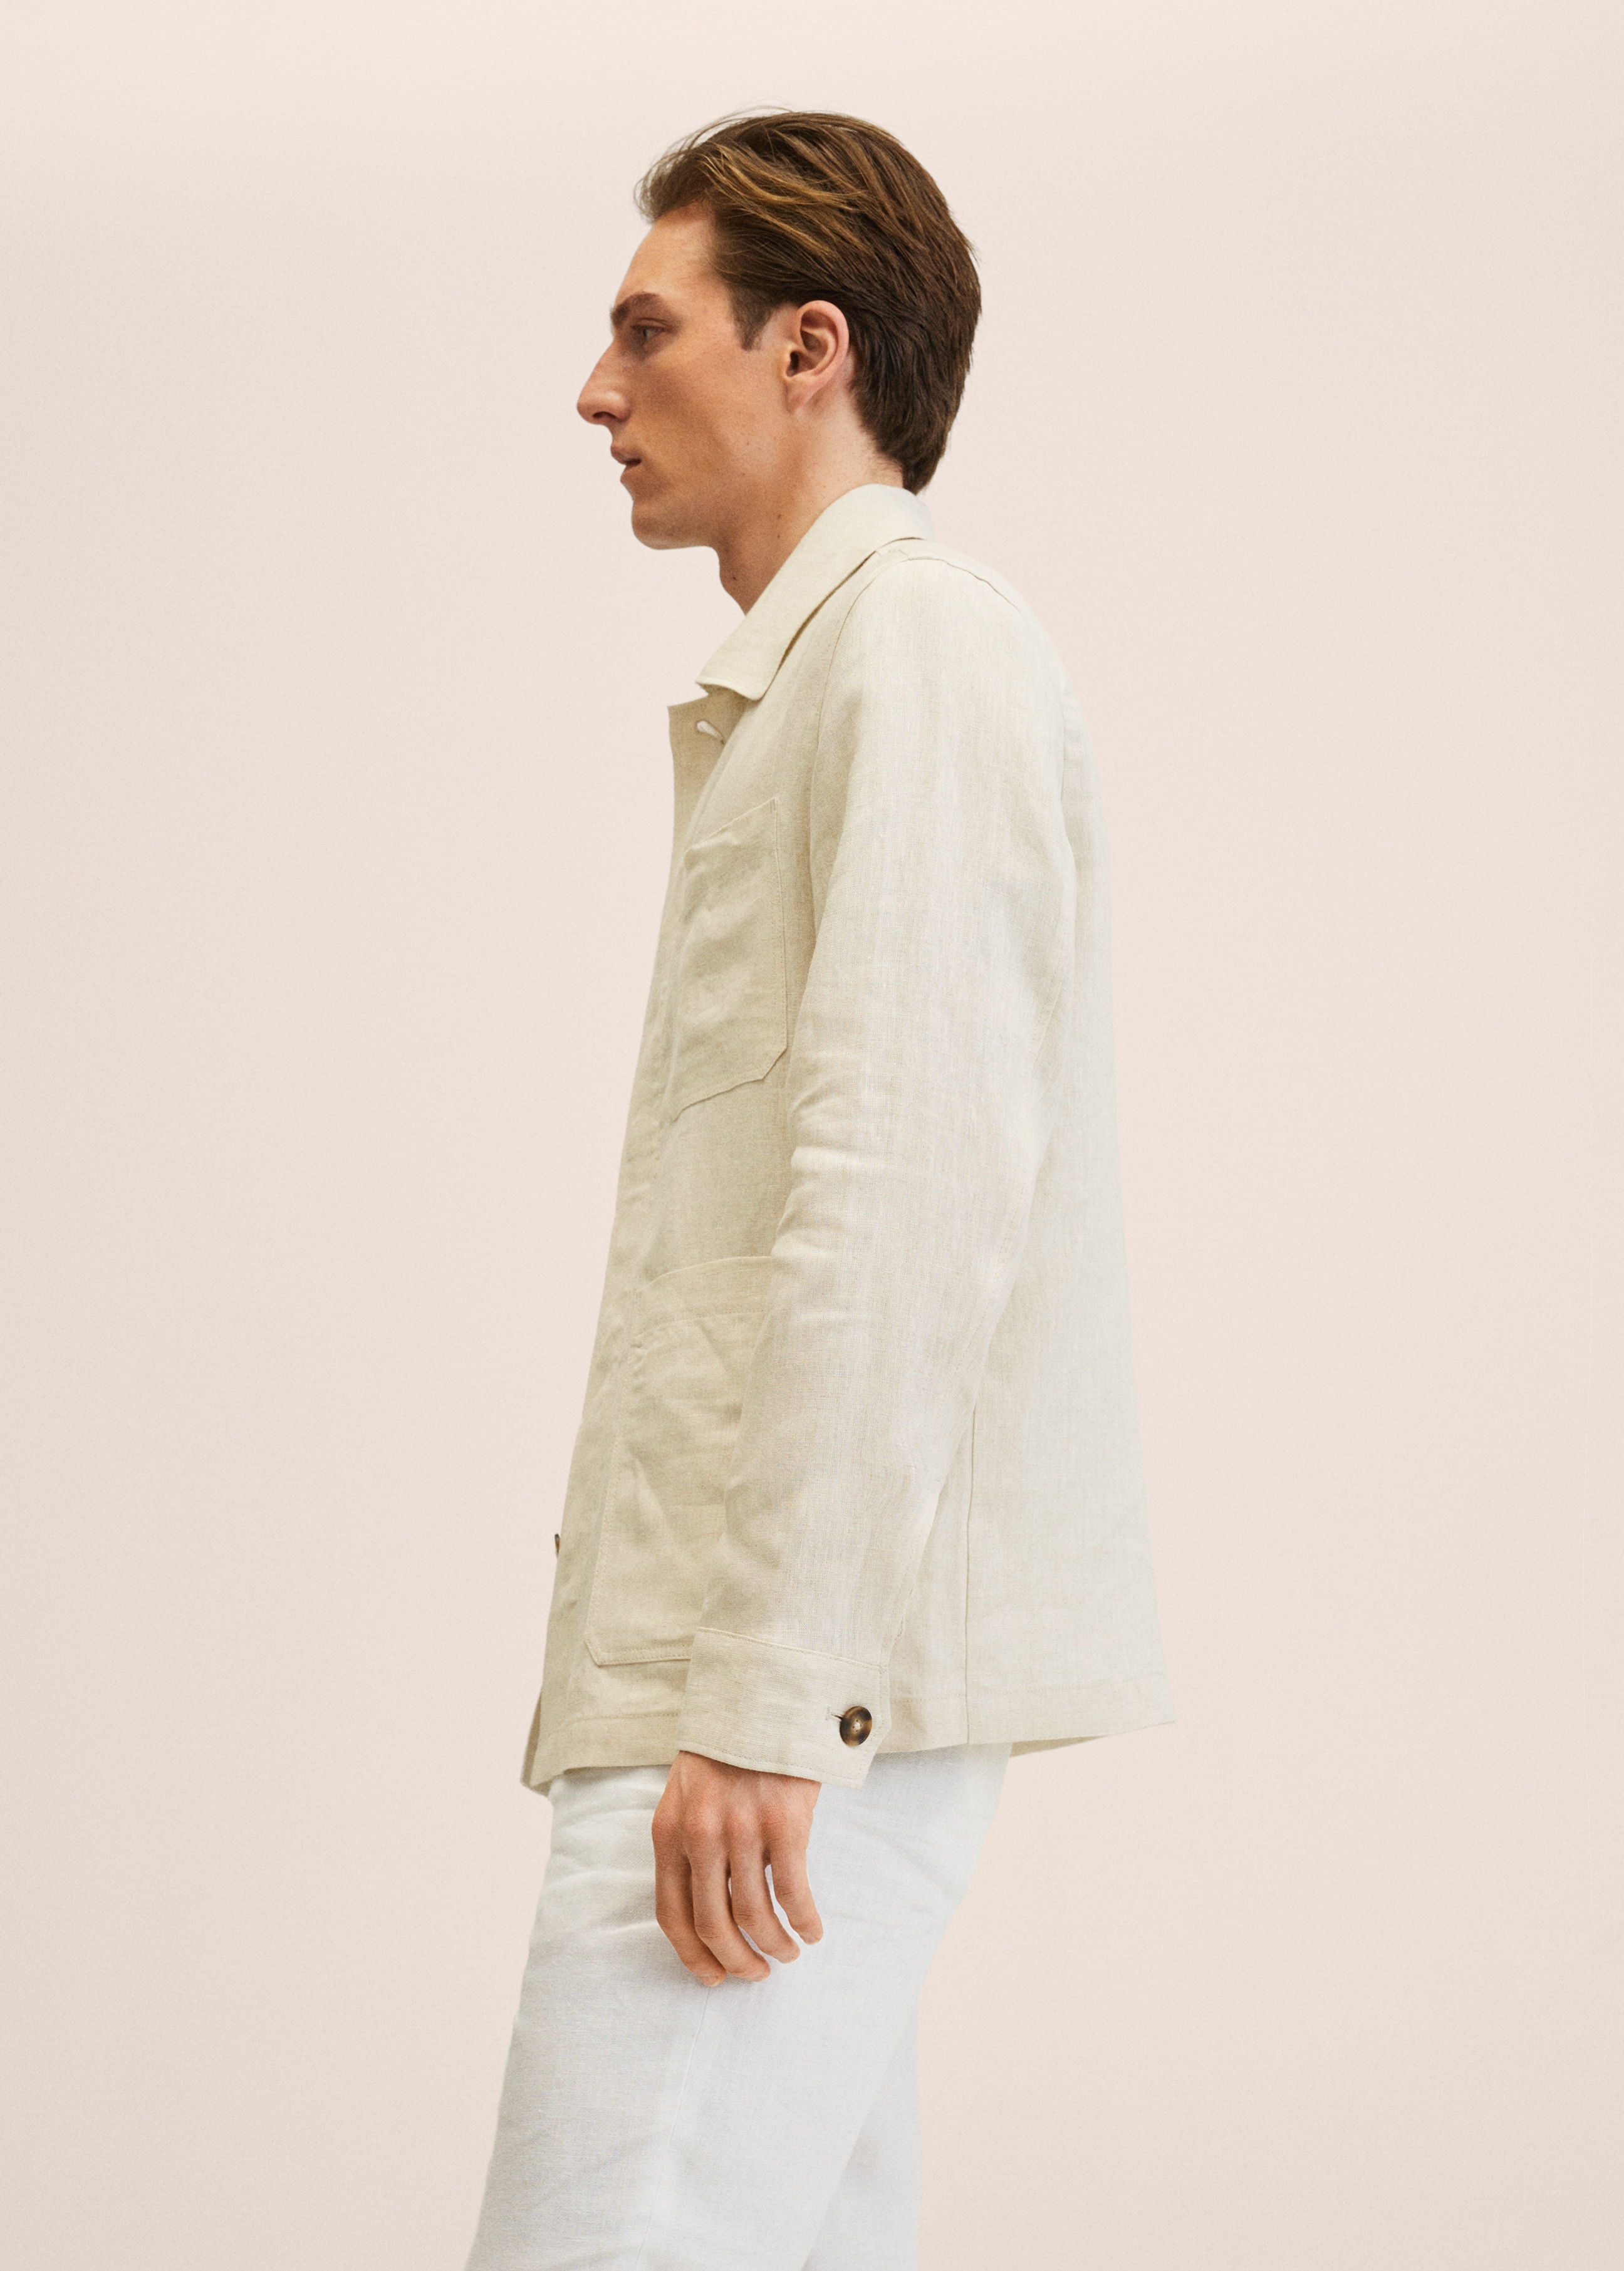 Linen worker jacket - Details of the article 2